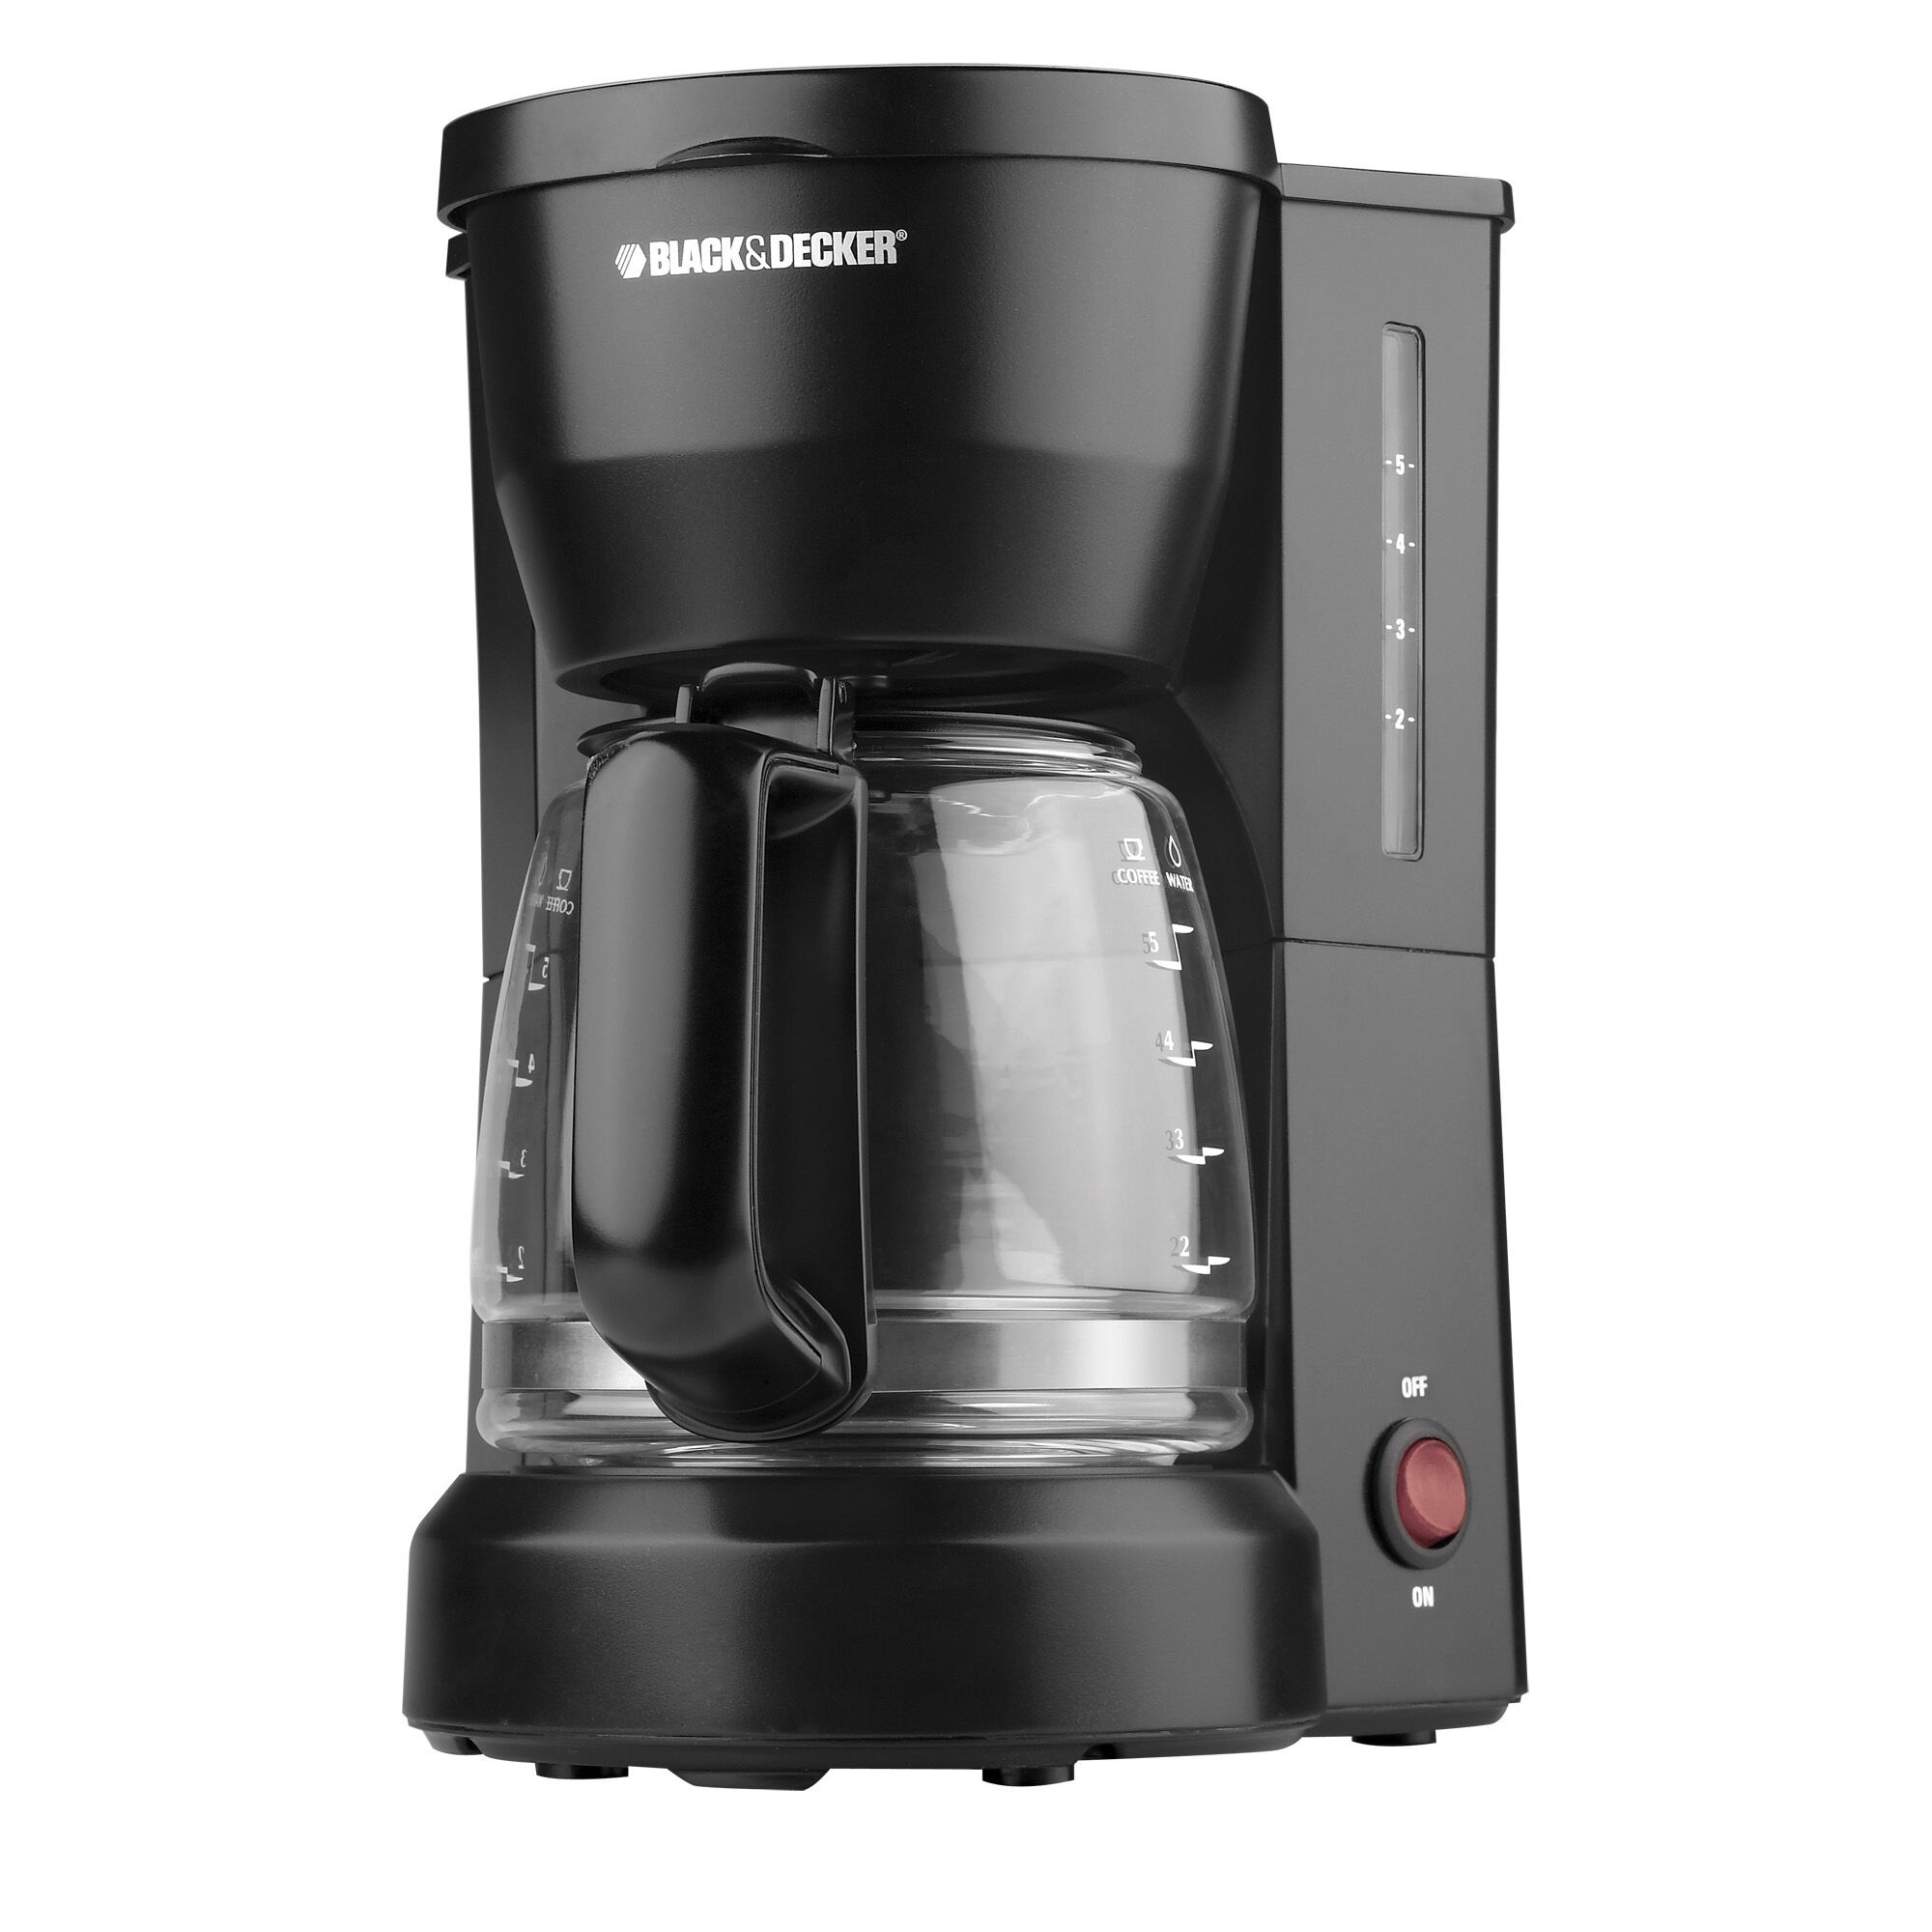 Profile of 5 cup coffee maker.